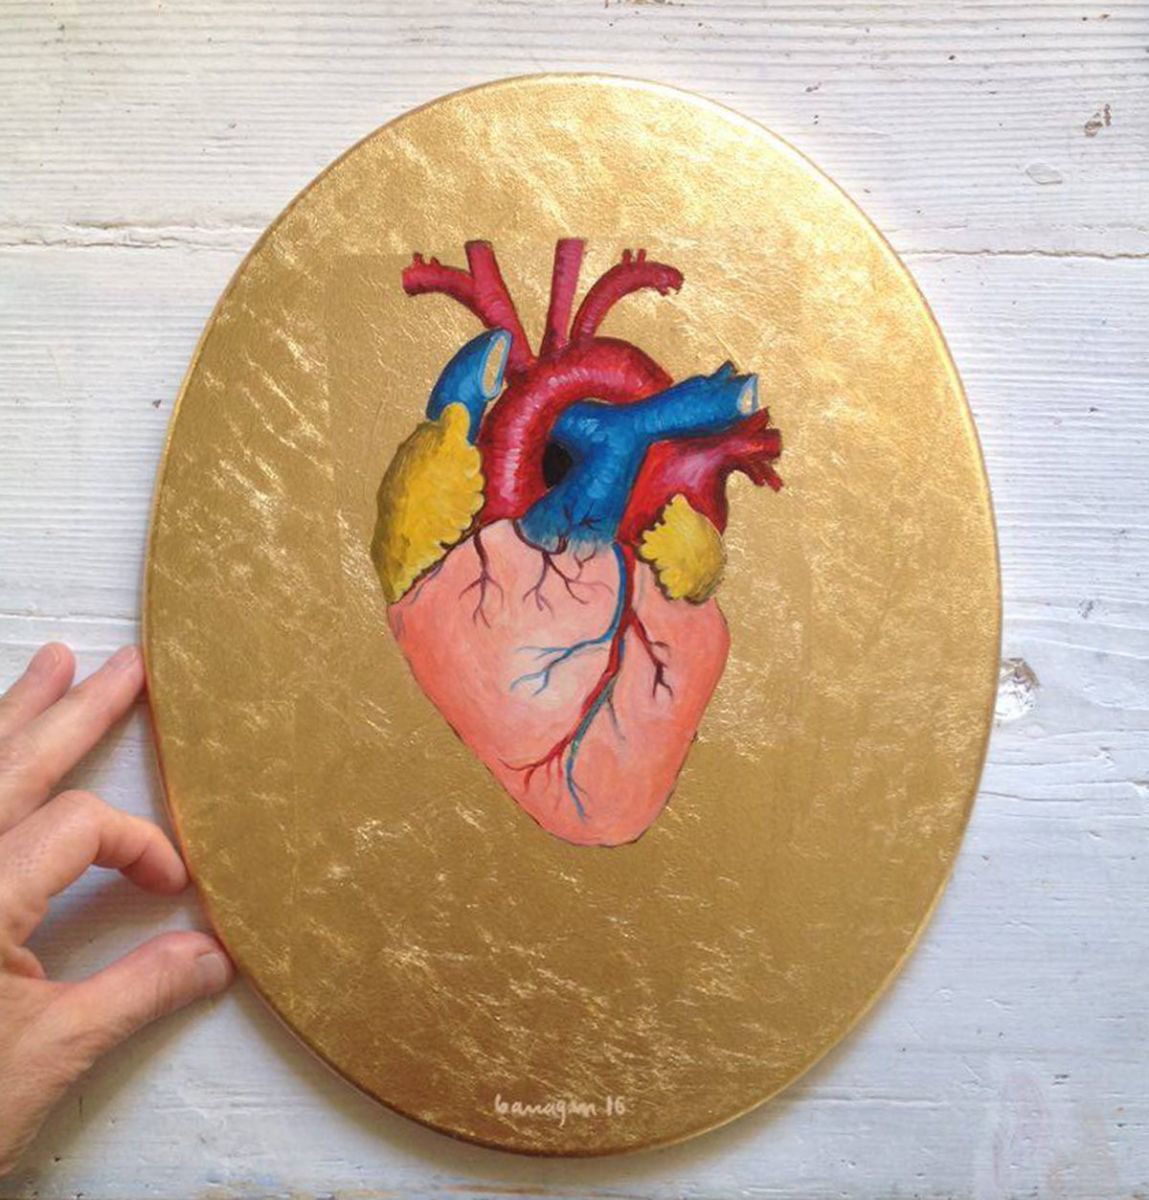 Little Sweetheart Heart Oil Painting on Oval Lacquered Golden Leaf Canvas Frame by Caridad I. Barragan